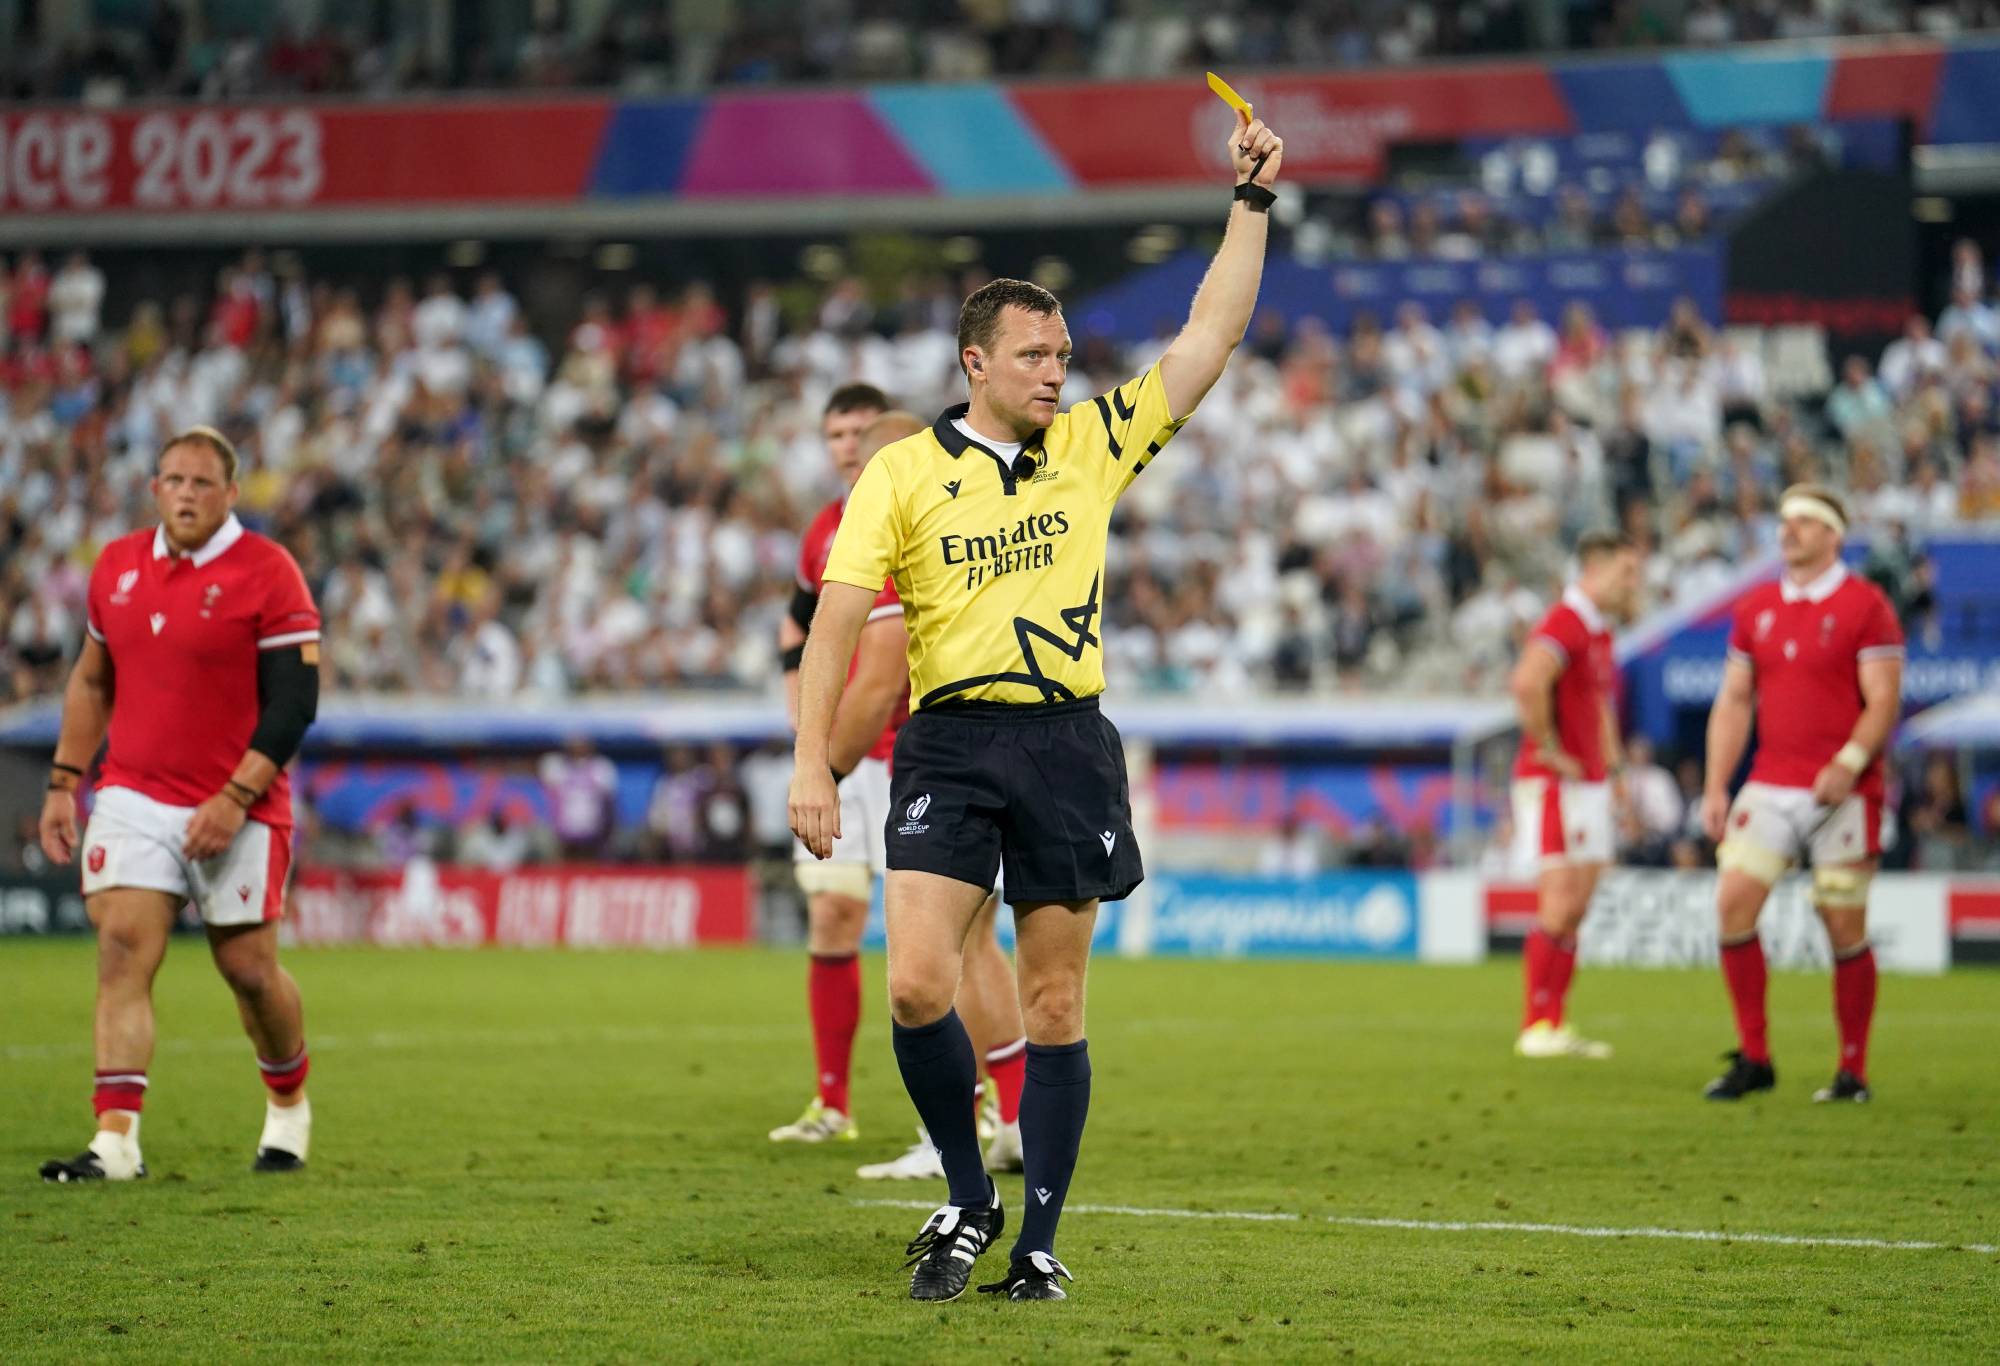 Referee Matthew Carley shows a yellow card to Fiji's Lekima Tagitagivalu during the 2023 Rugby World Cup Pool C match at the Stade de Bordeaux, France. Picture date: Sunday September 10, 2023. (Photo by David Davies/PA Images via Getty Images)